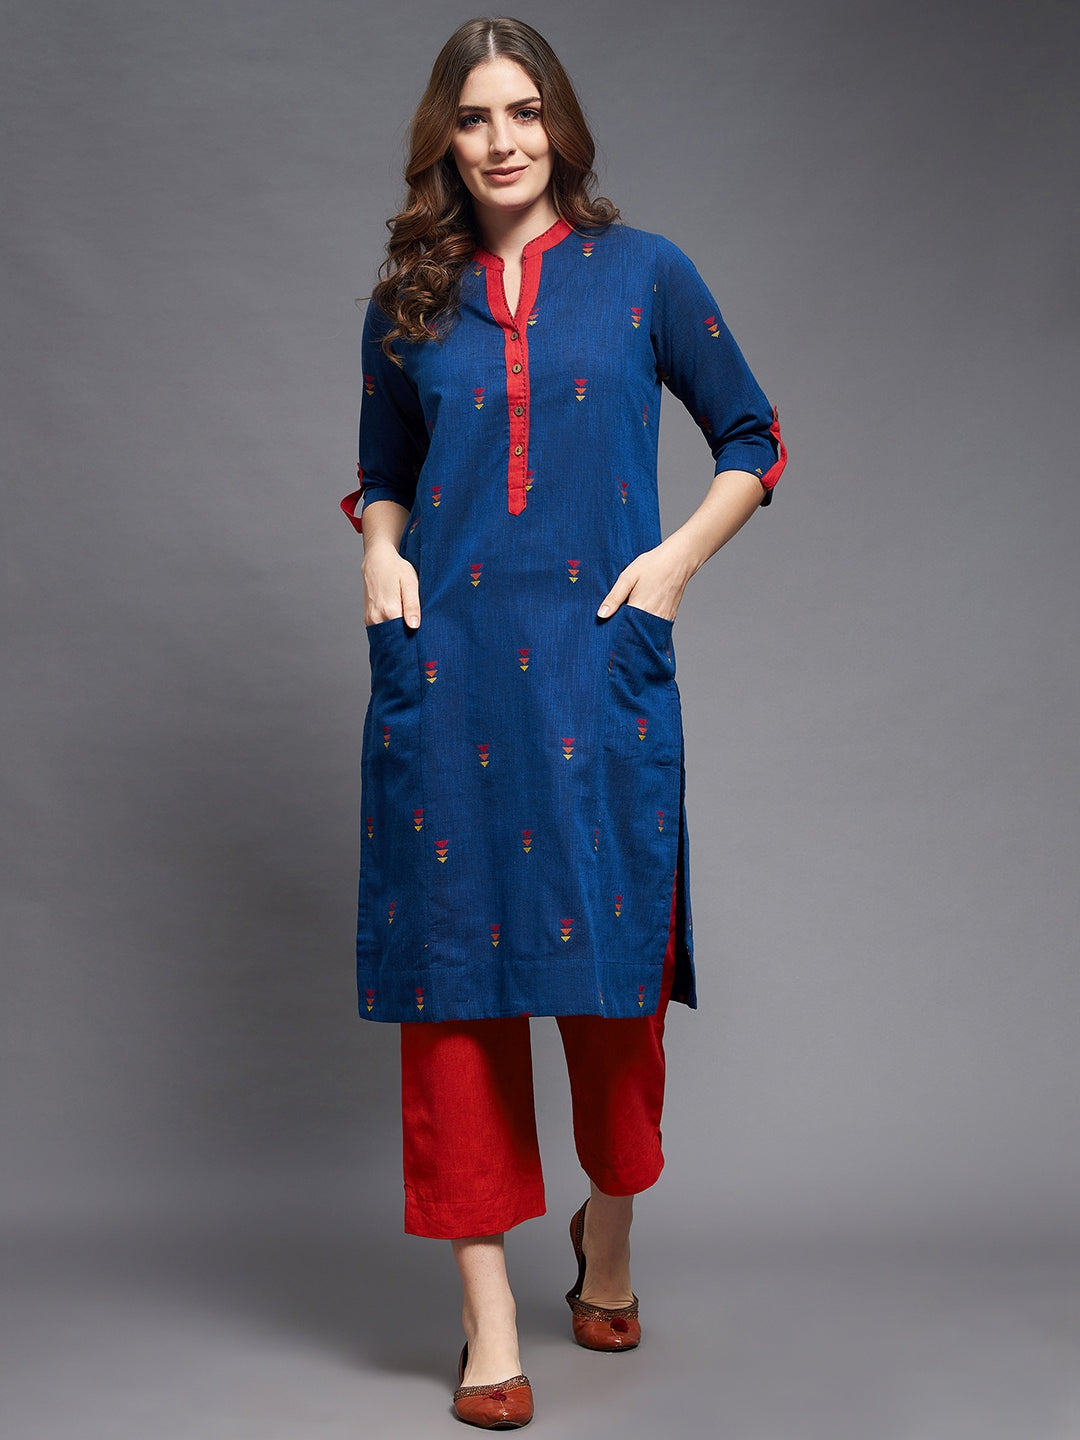 Beefive.in - SOUTH COTTON KURTI @769/- only PRODUCT CODE: BMS0000007 Link  in Bio... Tag that ETHNIC GIRL ❤ #kurti #beefive.in #shopping  #onlineshopping #fashion #bloggers #sale #offer #discounts #startup  #indianproducts #jewellery #ethnic #sarees #